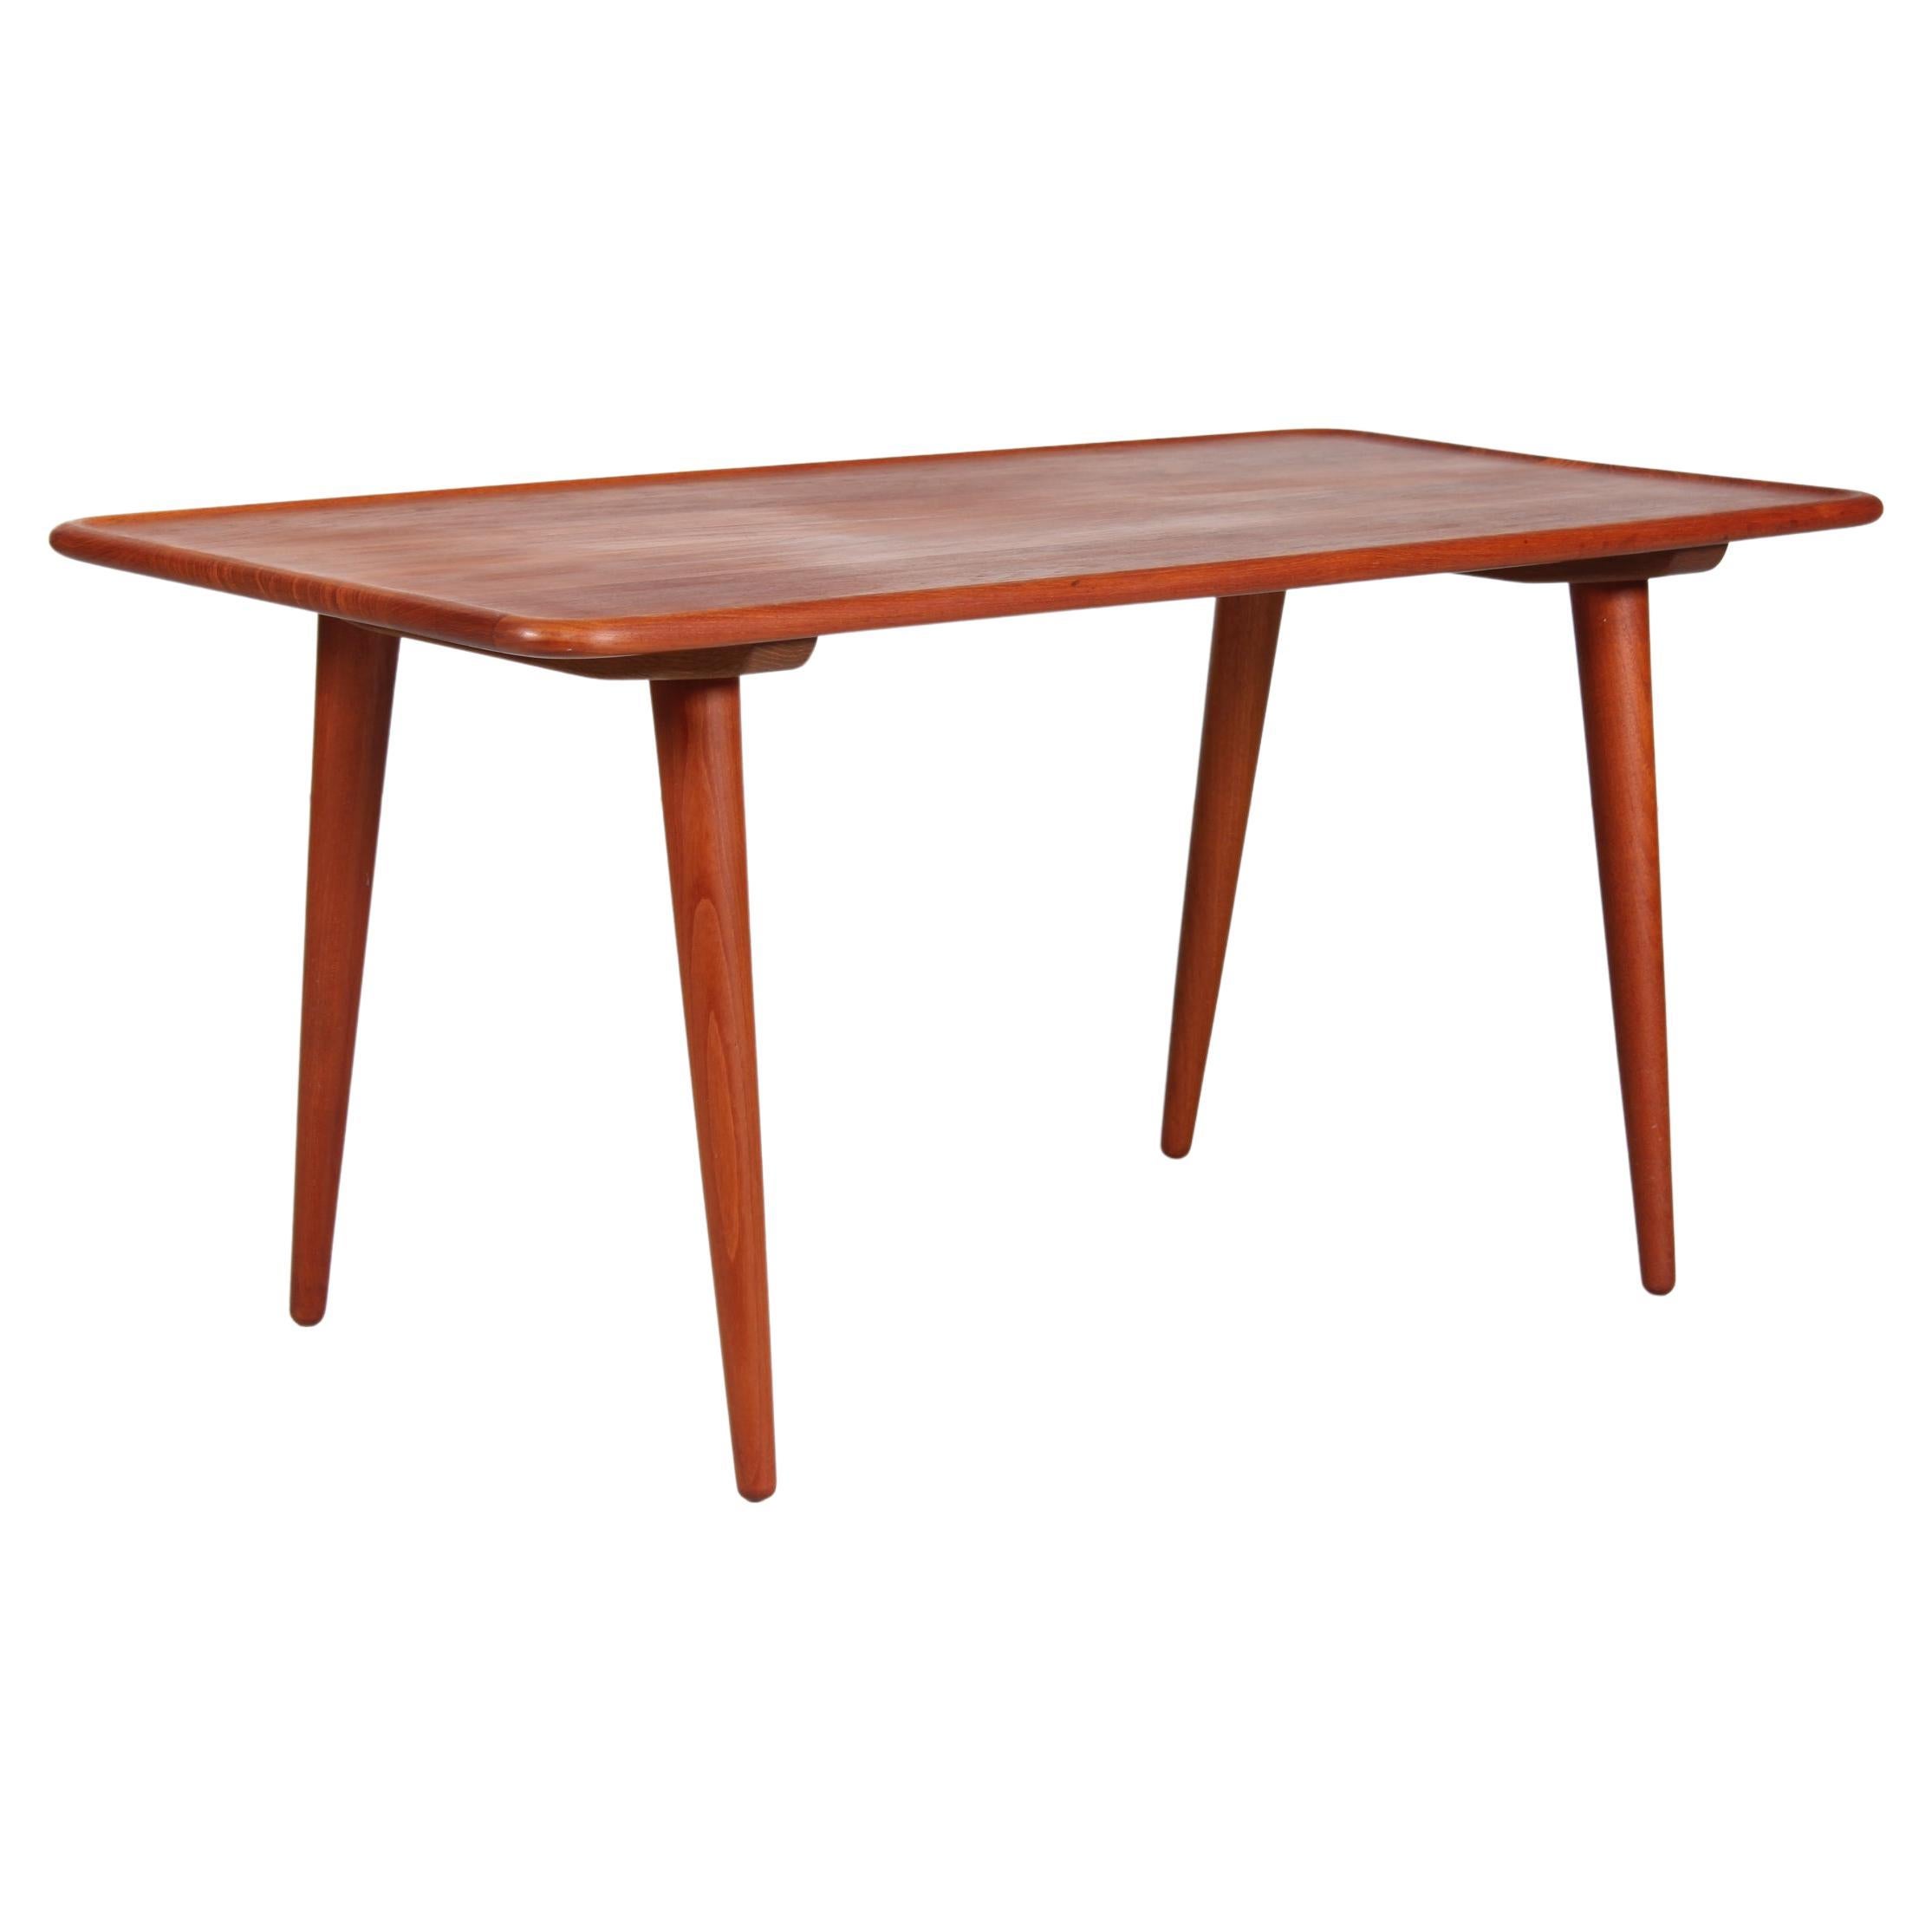 Hans J. Wegner Vintage Coffee Table AT 11 by Danish Andreas Tuck, 1950s For Sale